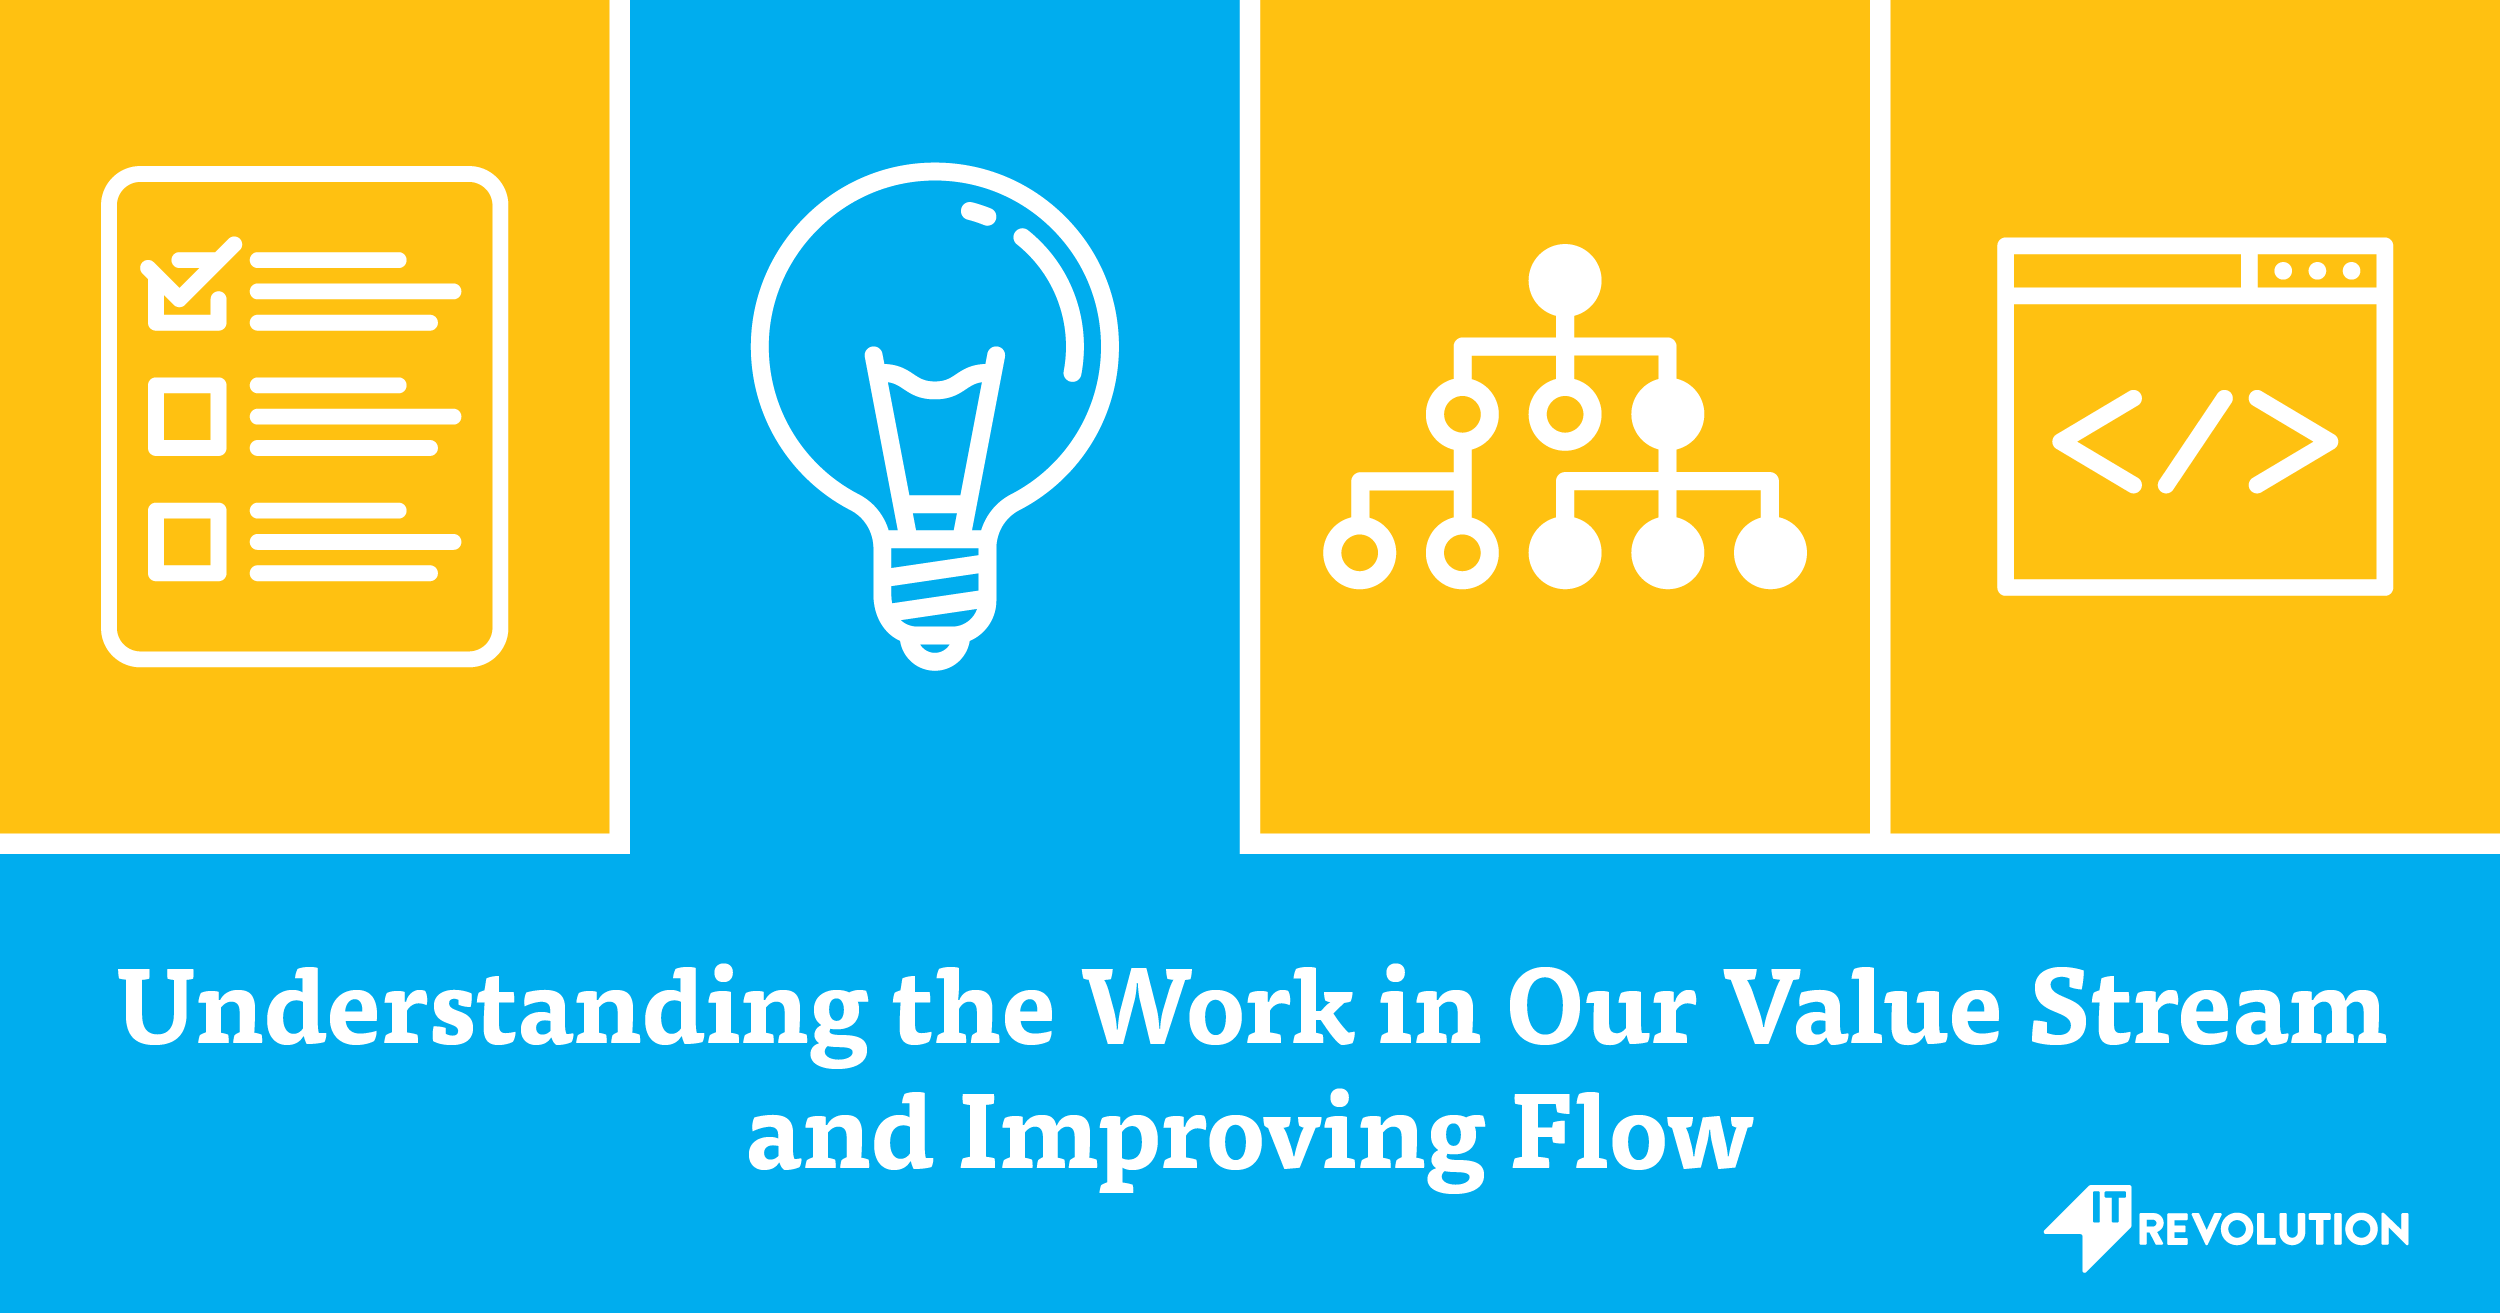 Understanding the work in our value stream and improving flow